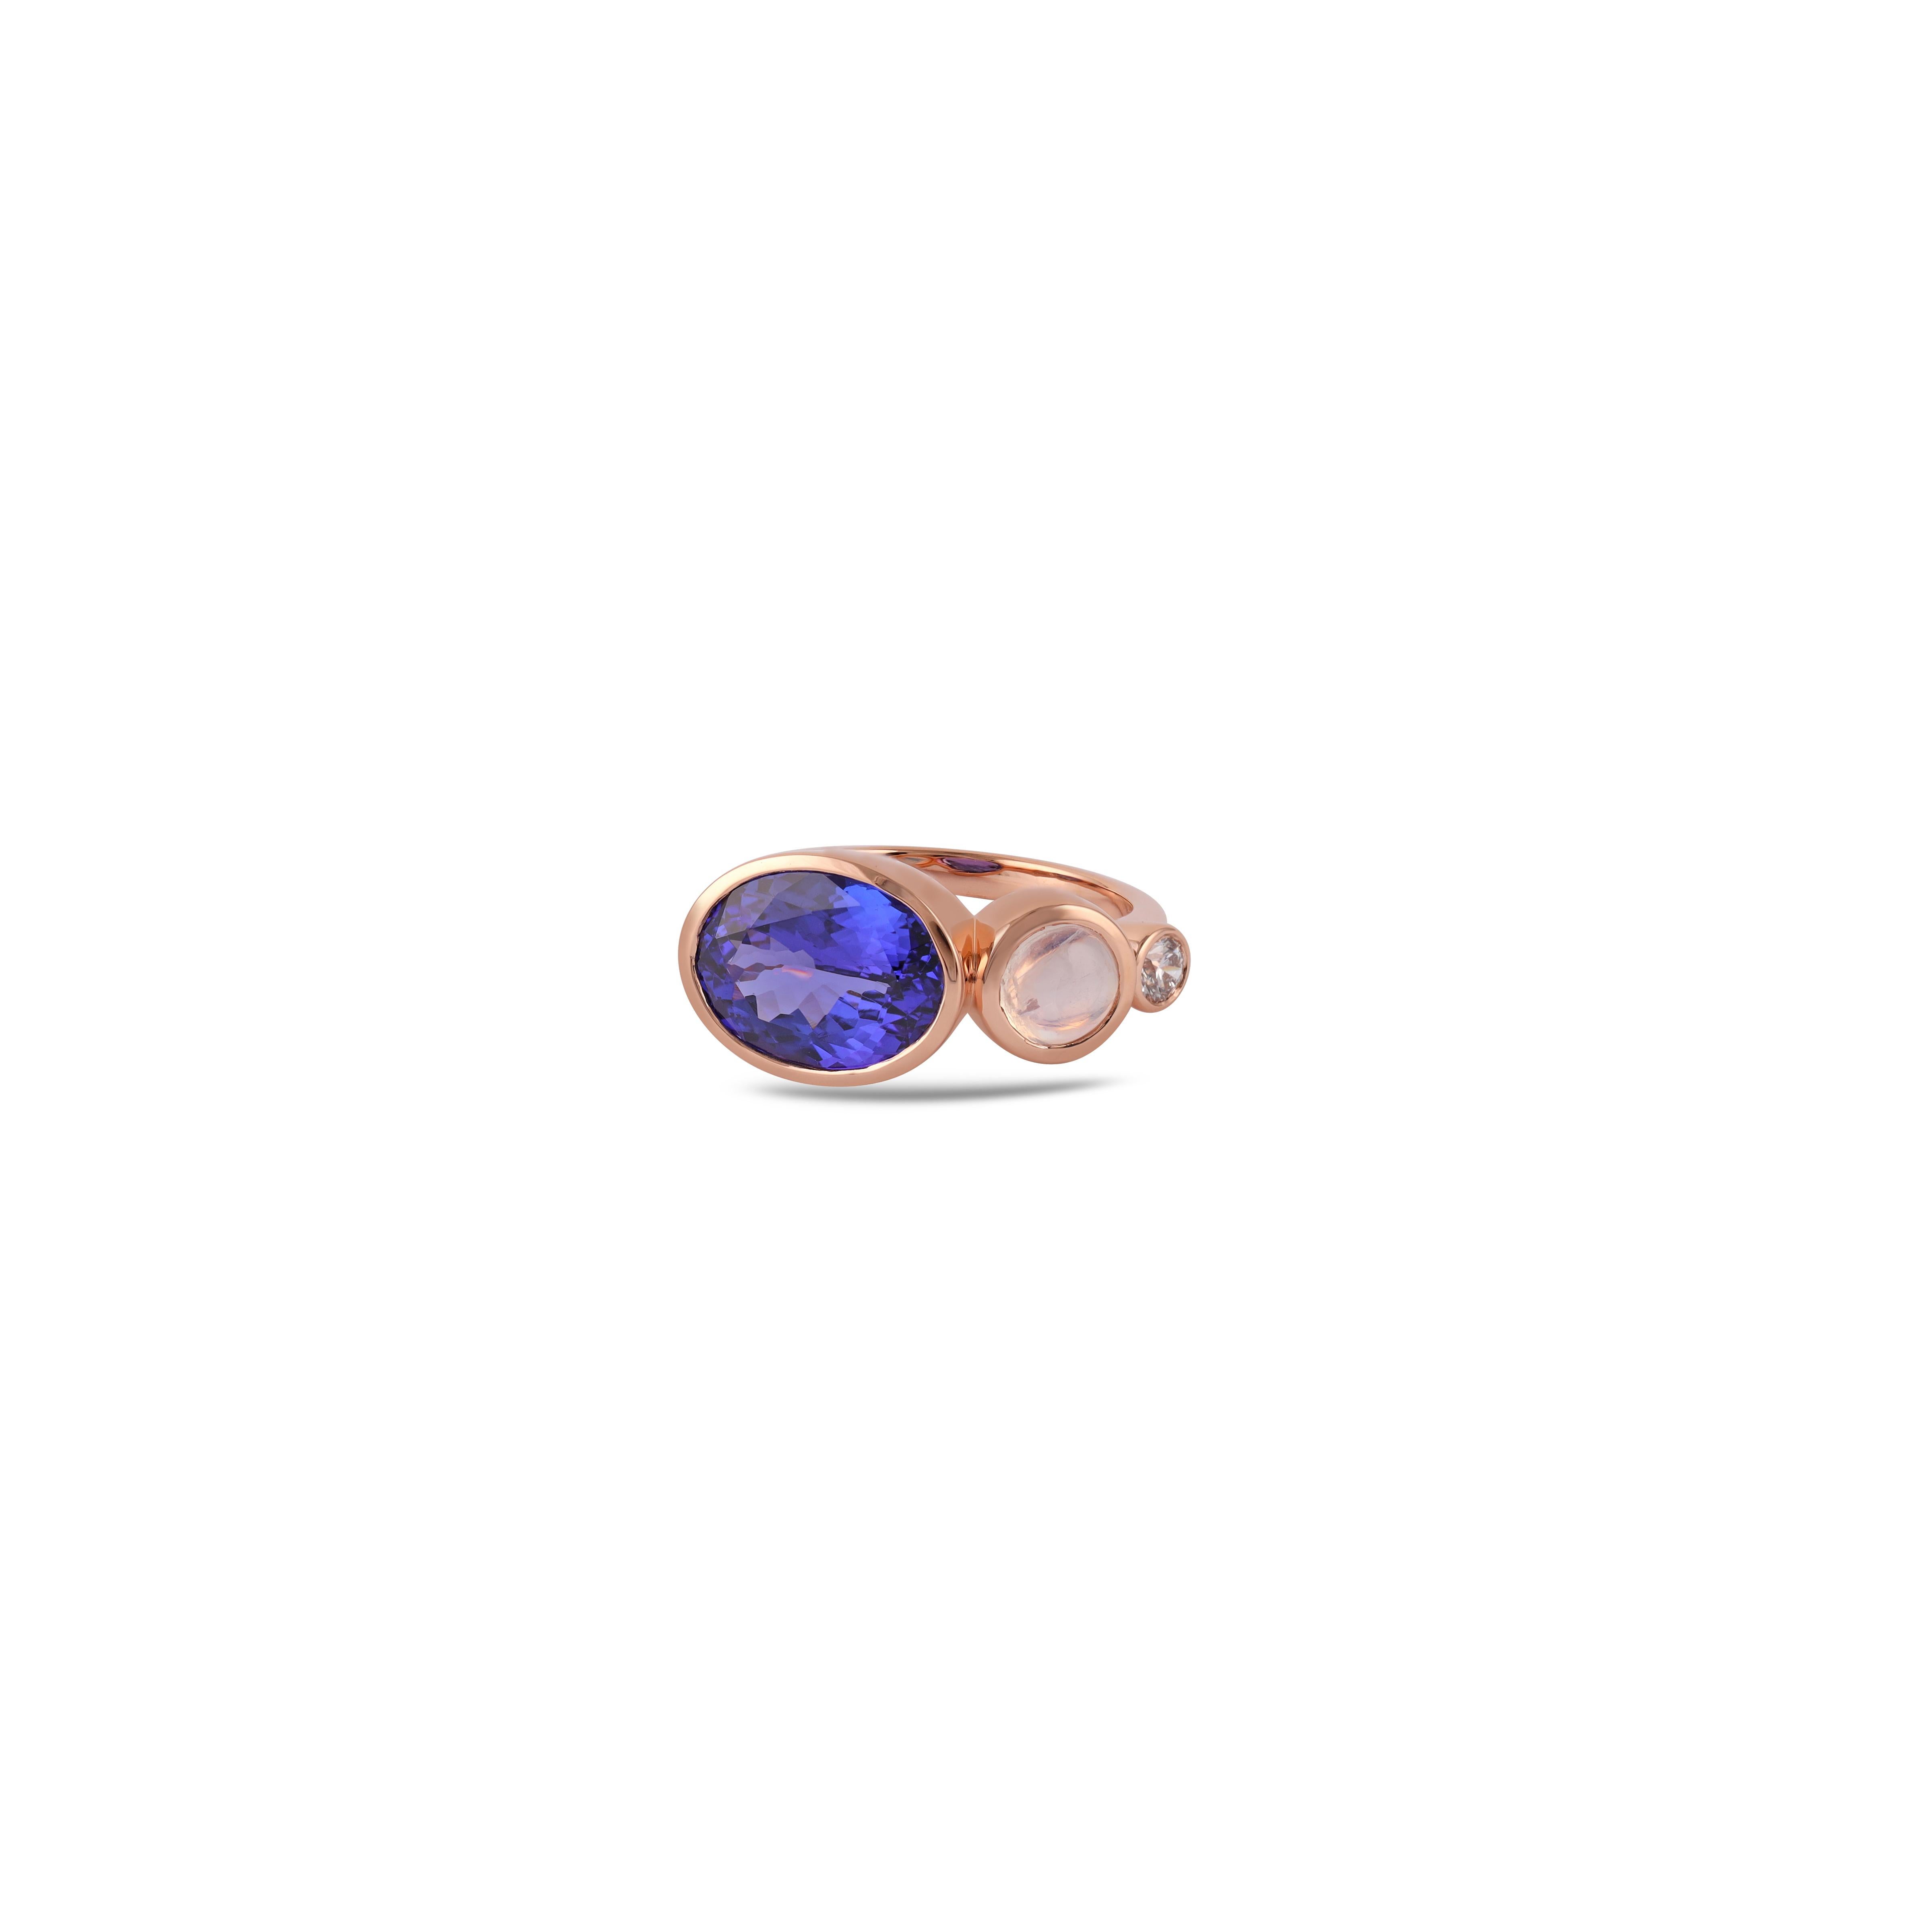 This is an elegant Tanzanite  & Multi Stones ring studded in 18k Rose gold features a fine quality of Oval-shaped Tanzanite 4.04 carats with 1 Diamond 0.14 carats, Multi Stone  0.98 Carat this entire ring is made in 18k Rose gold, it is a classic